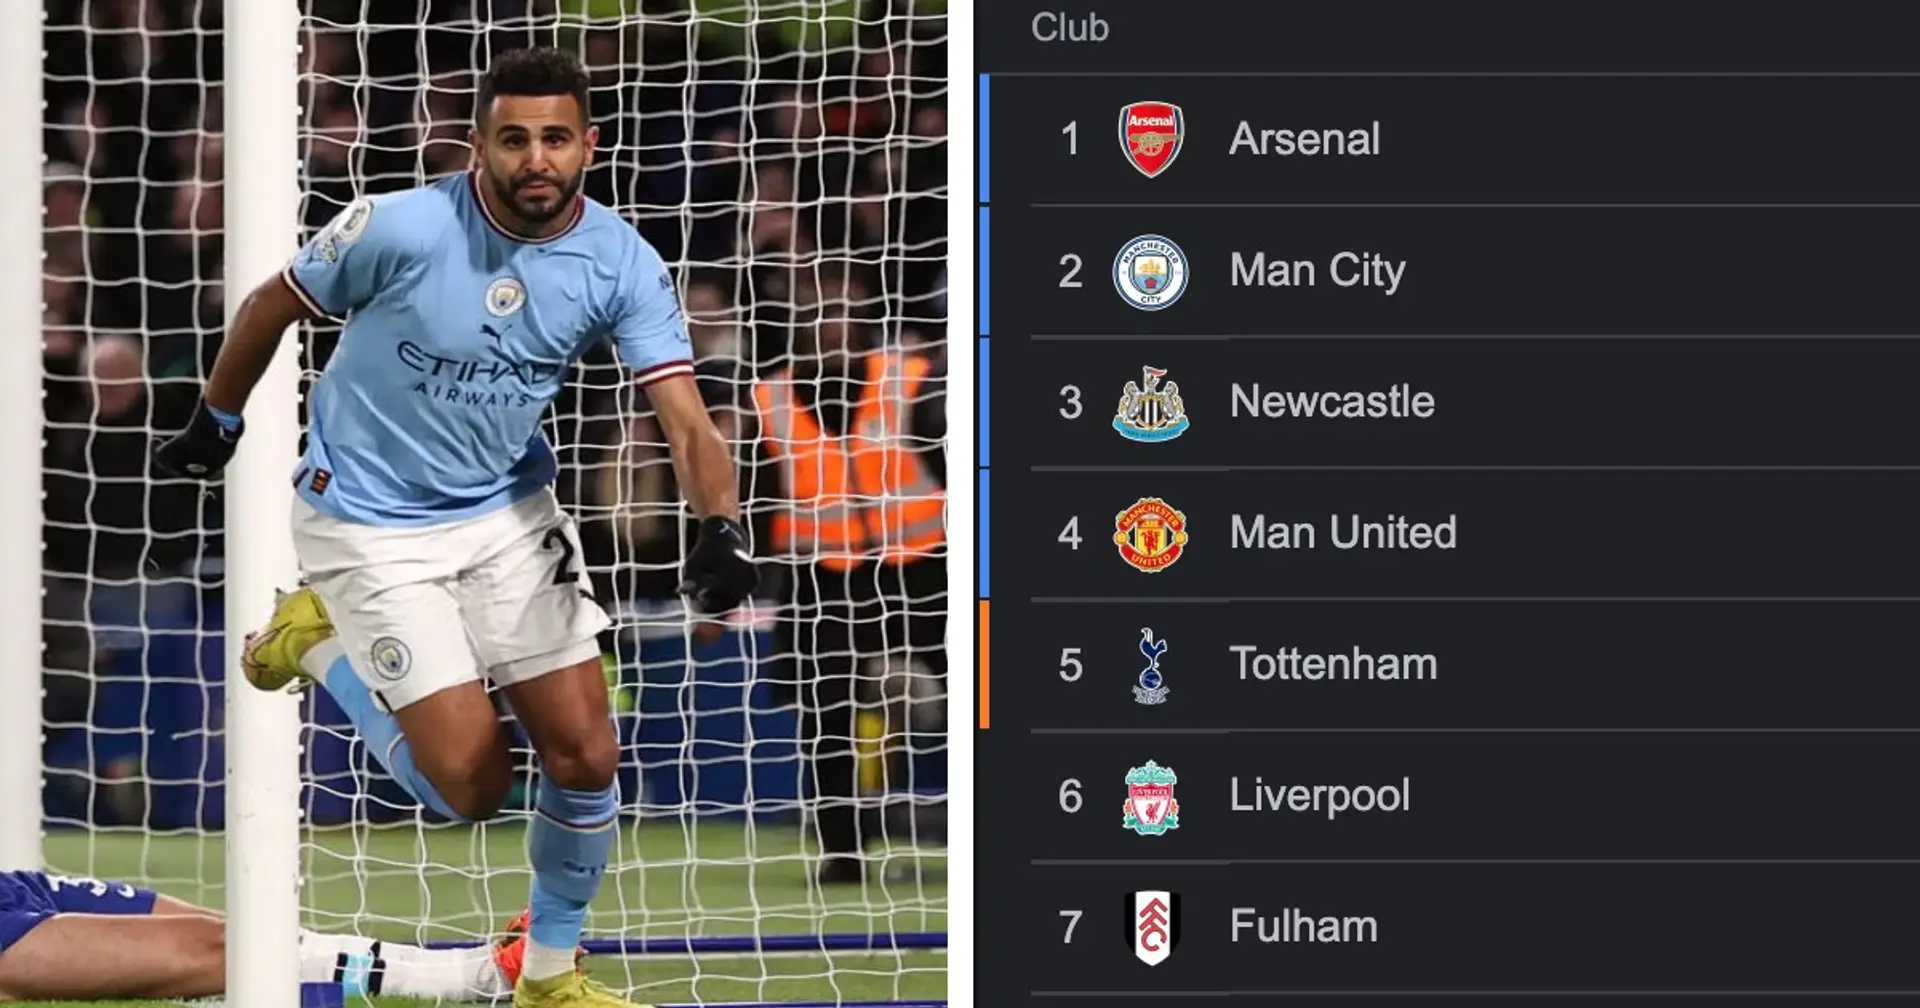 Man City close in on Arsenal with win over Chelsea: Updated Premier League standings